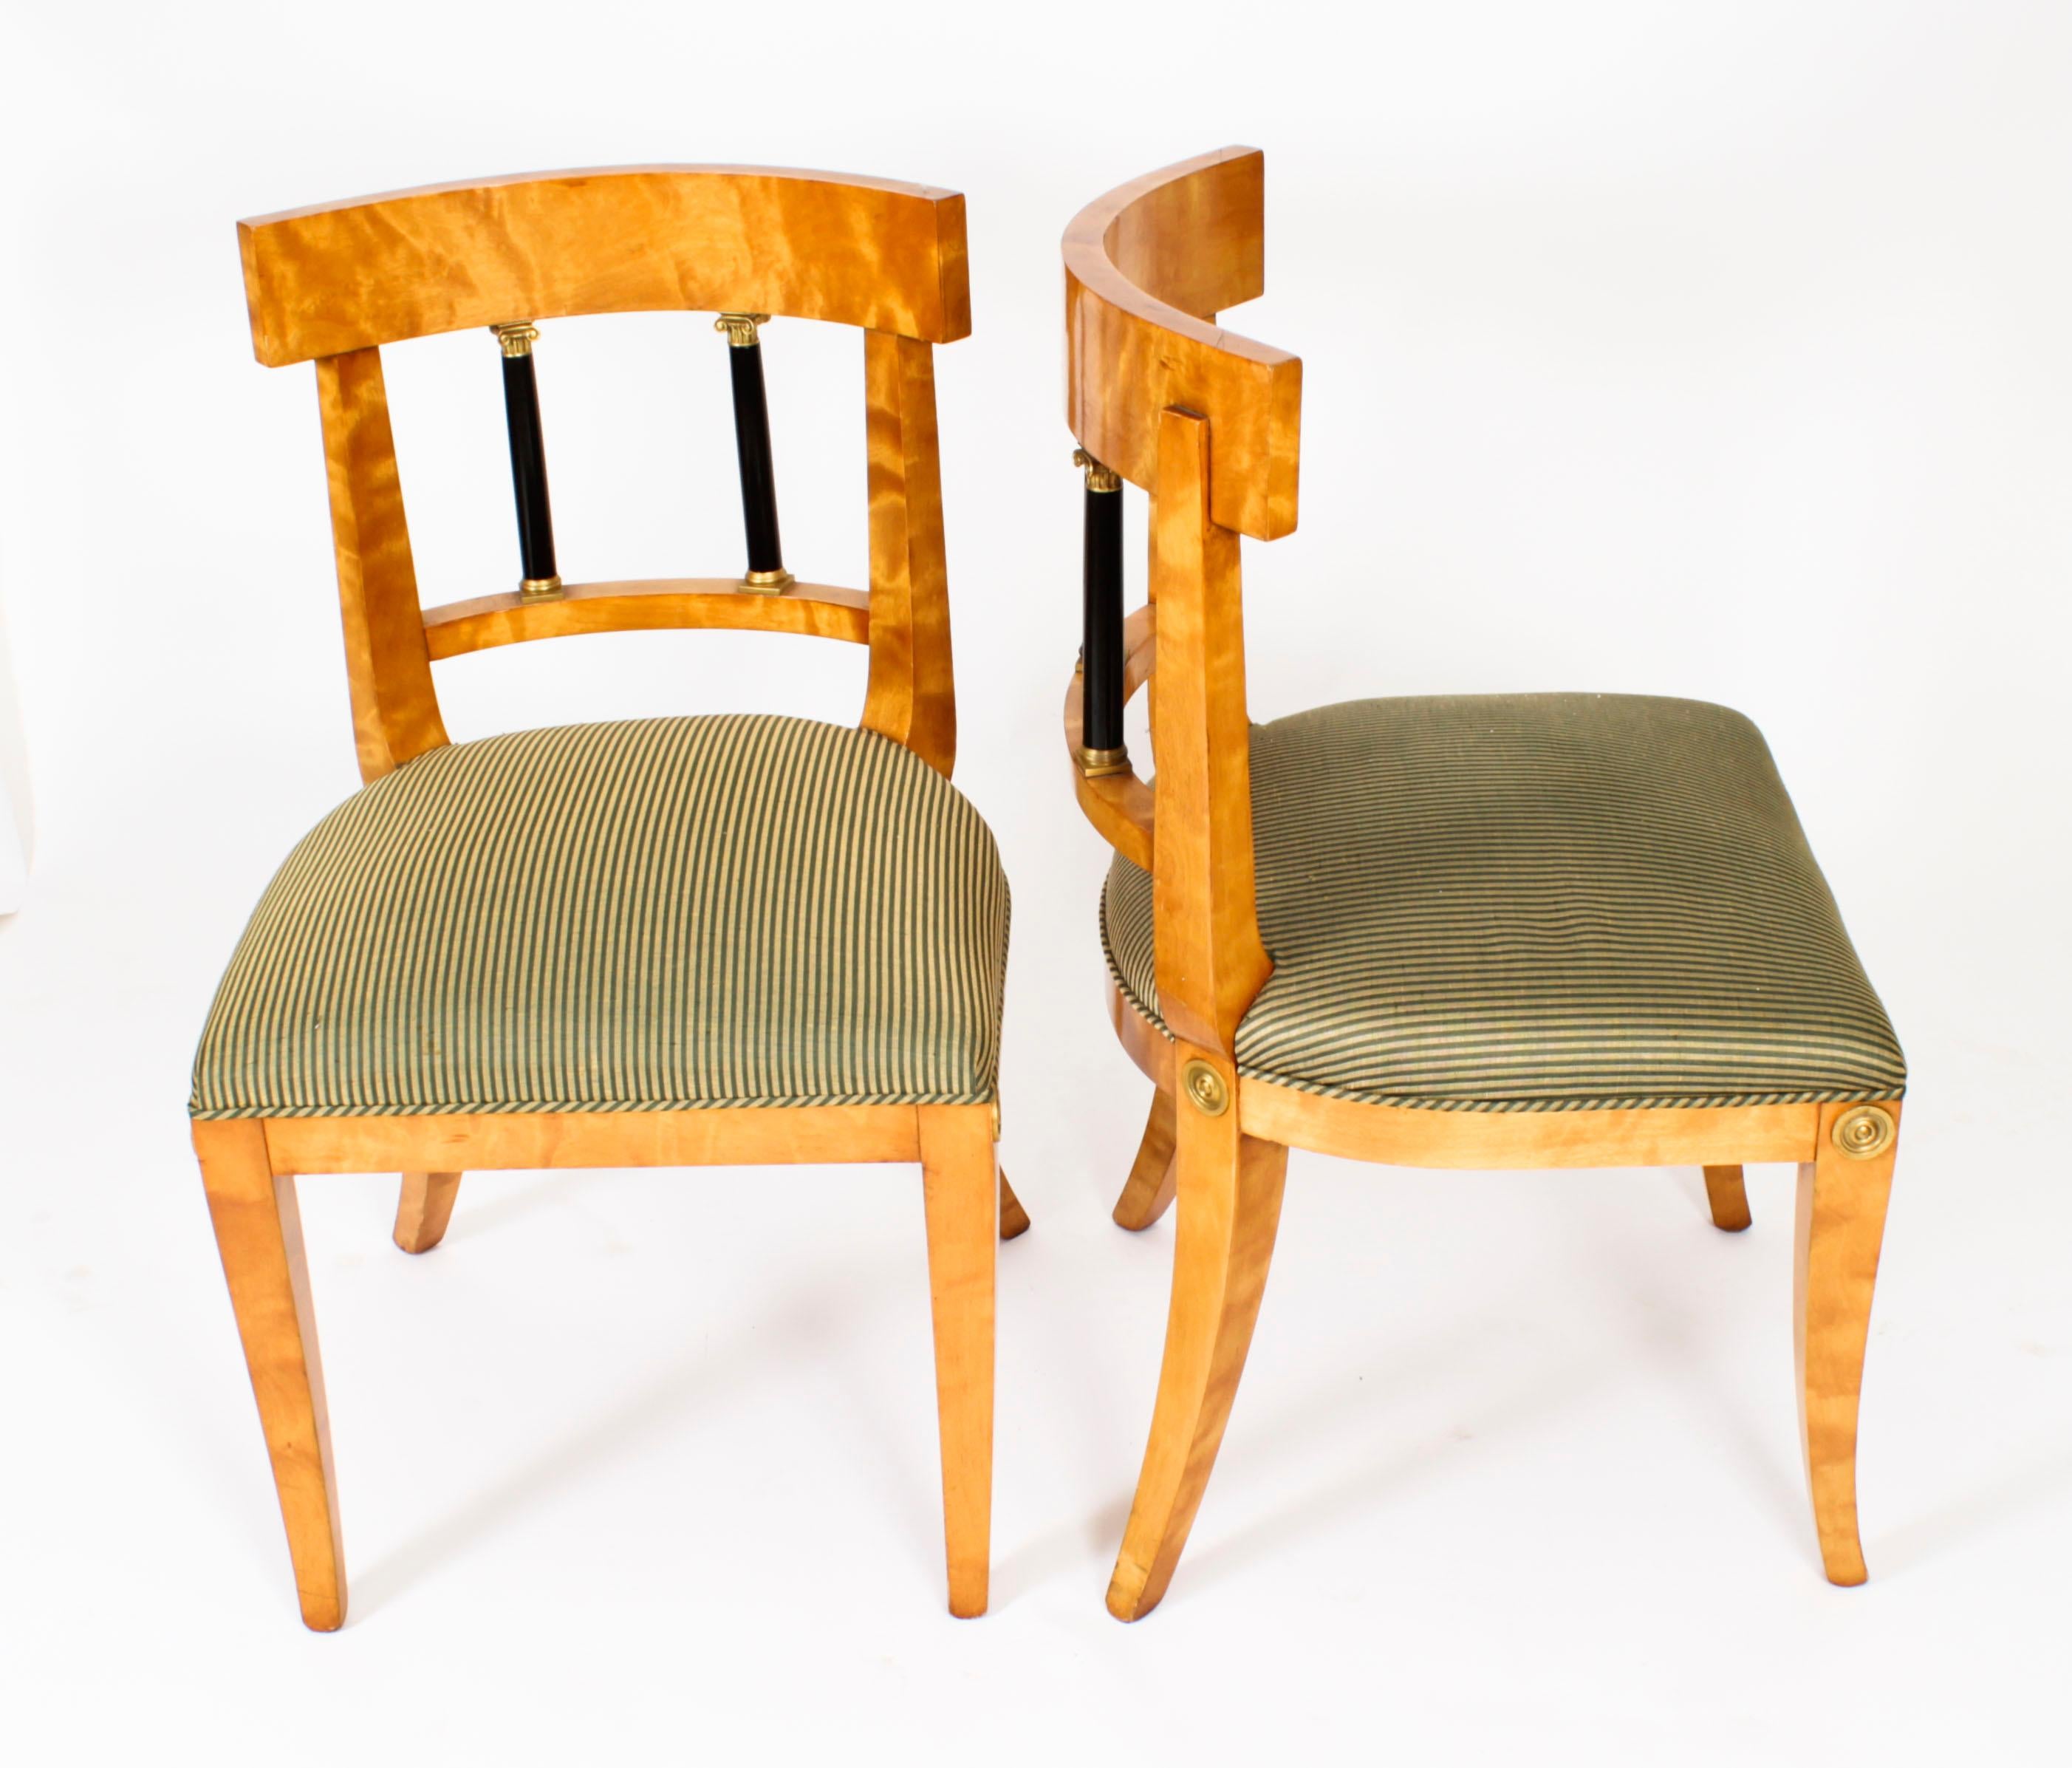 This is a fabulous and rare antique set of twelve Swedish Biedermeier birch, ormolu mounted, and ebonized dining chairs, Circa 1880 in date.

The chairs feature curved backs with ebonized Corinthian column splats and ormolu capital mounts with